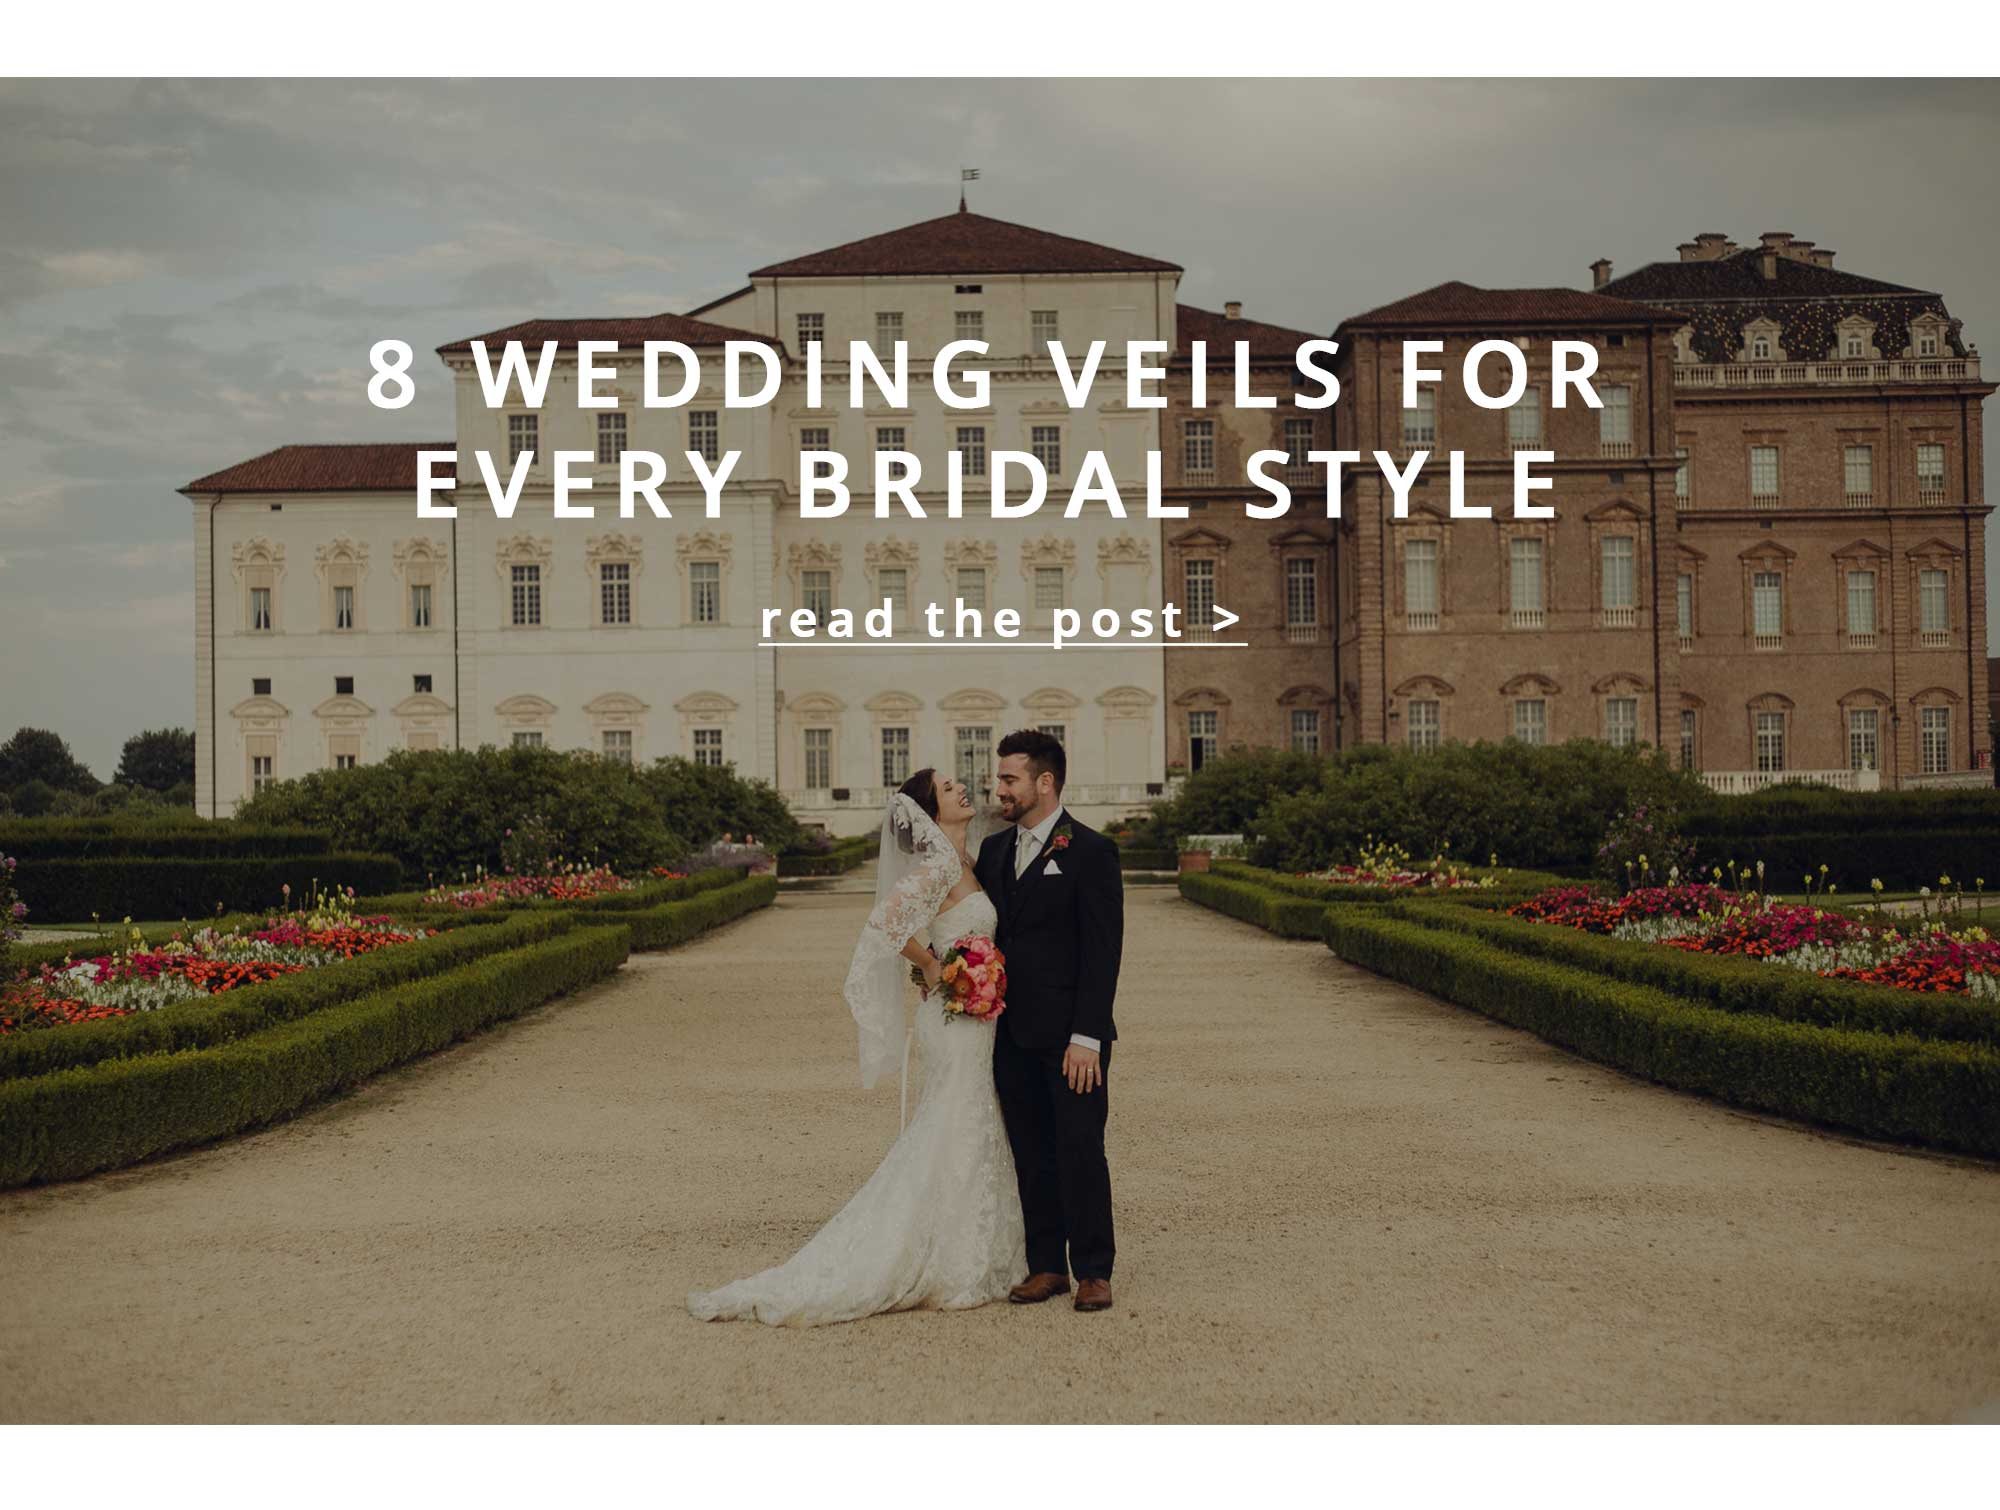 8 wedding veils for every bridal style